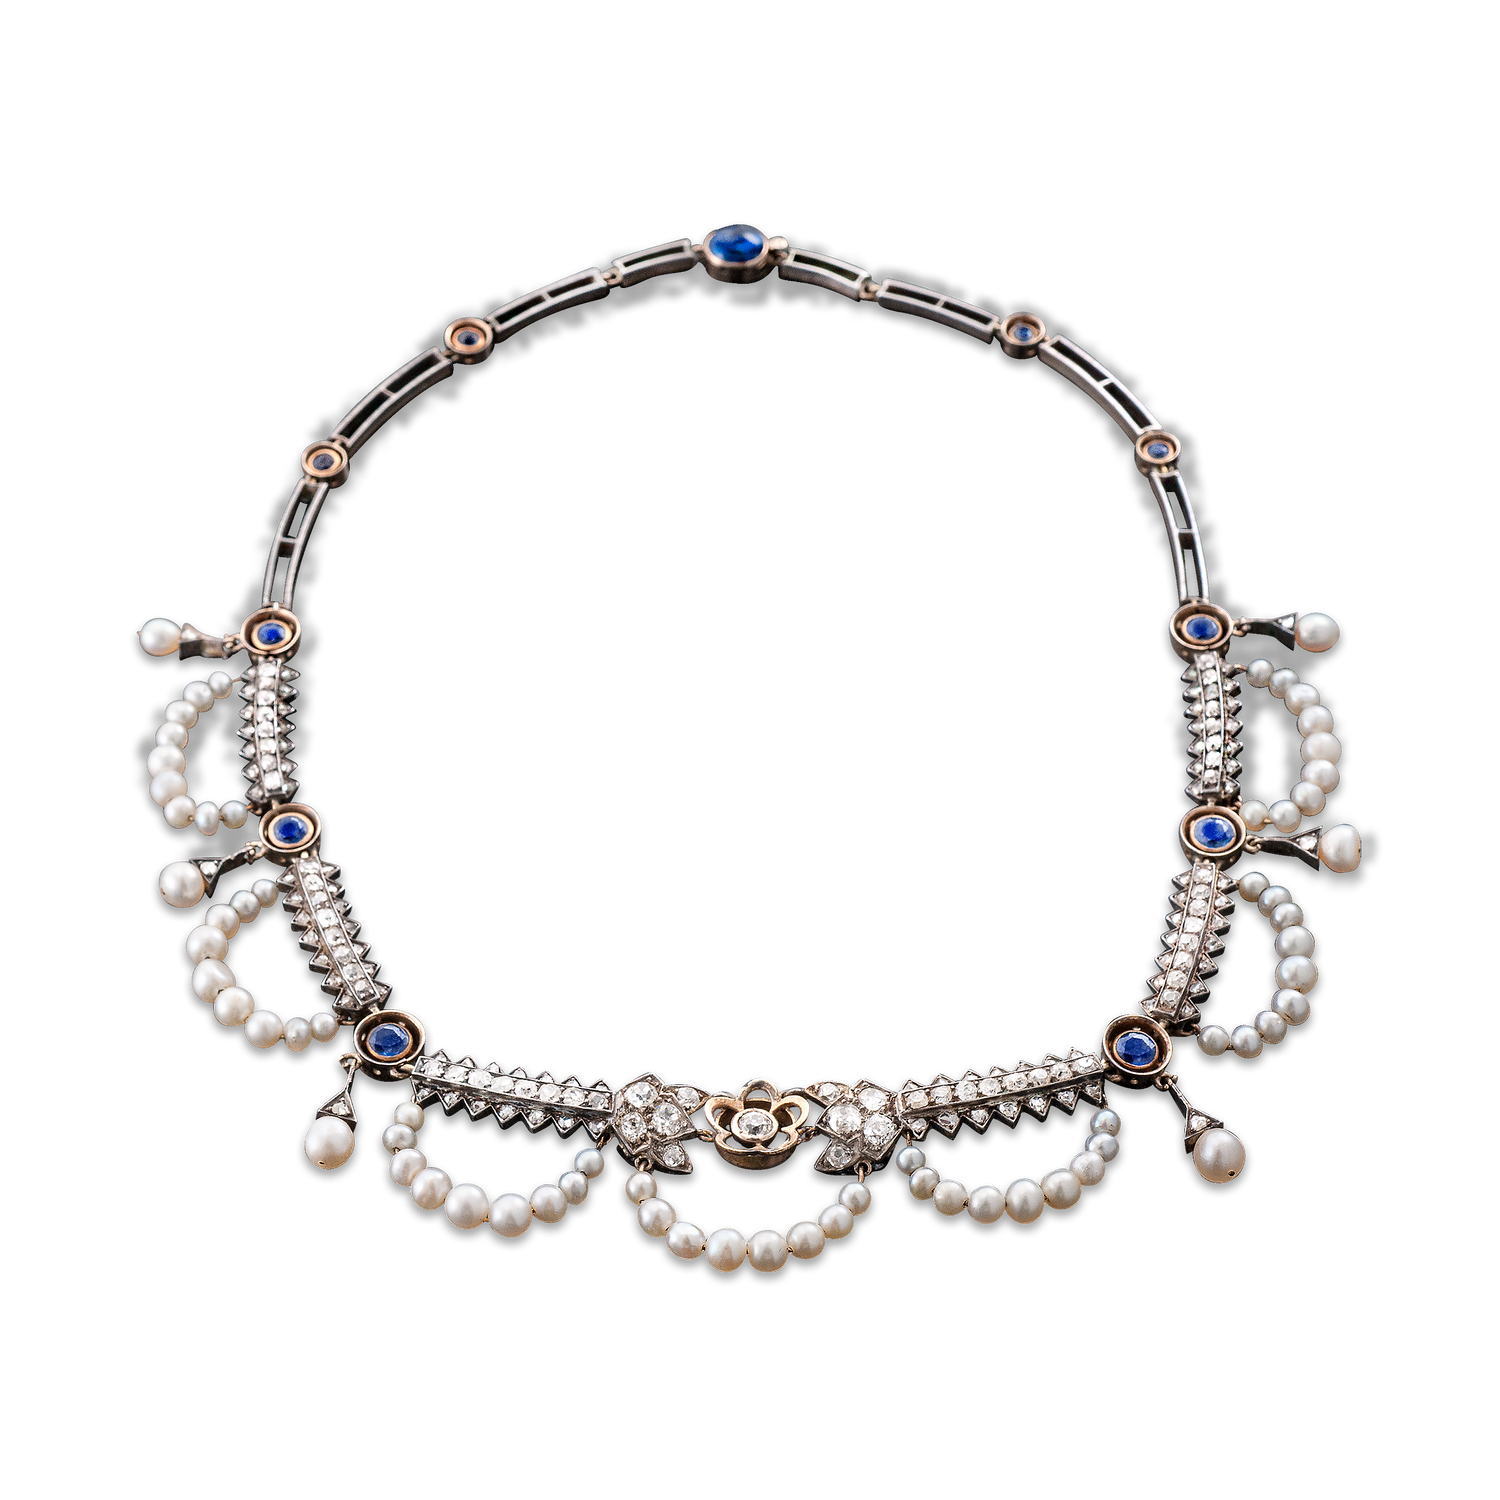 Victorian Saltwater Pearl and Diamond Necklace